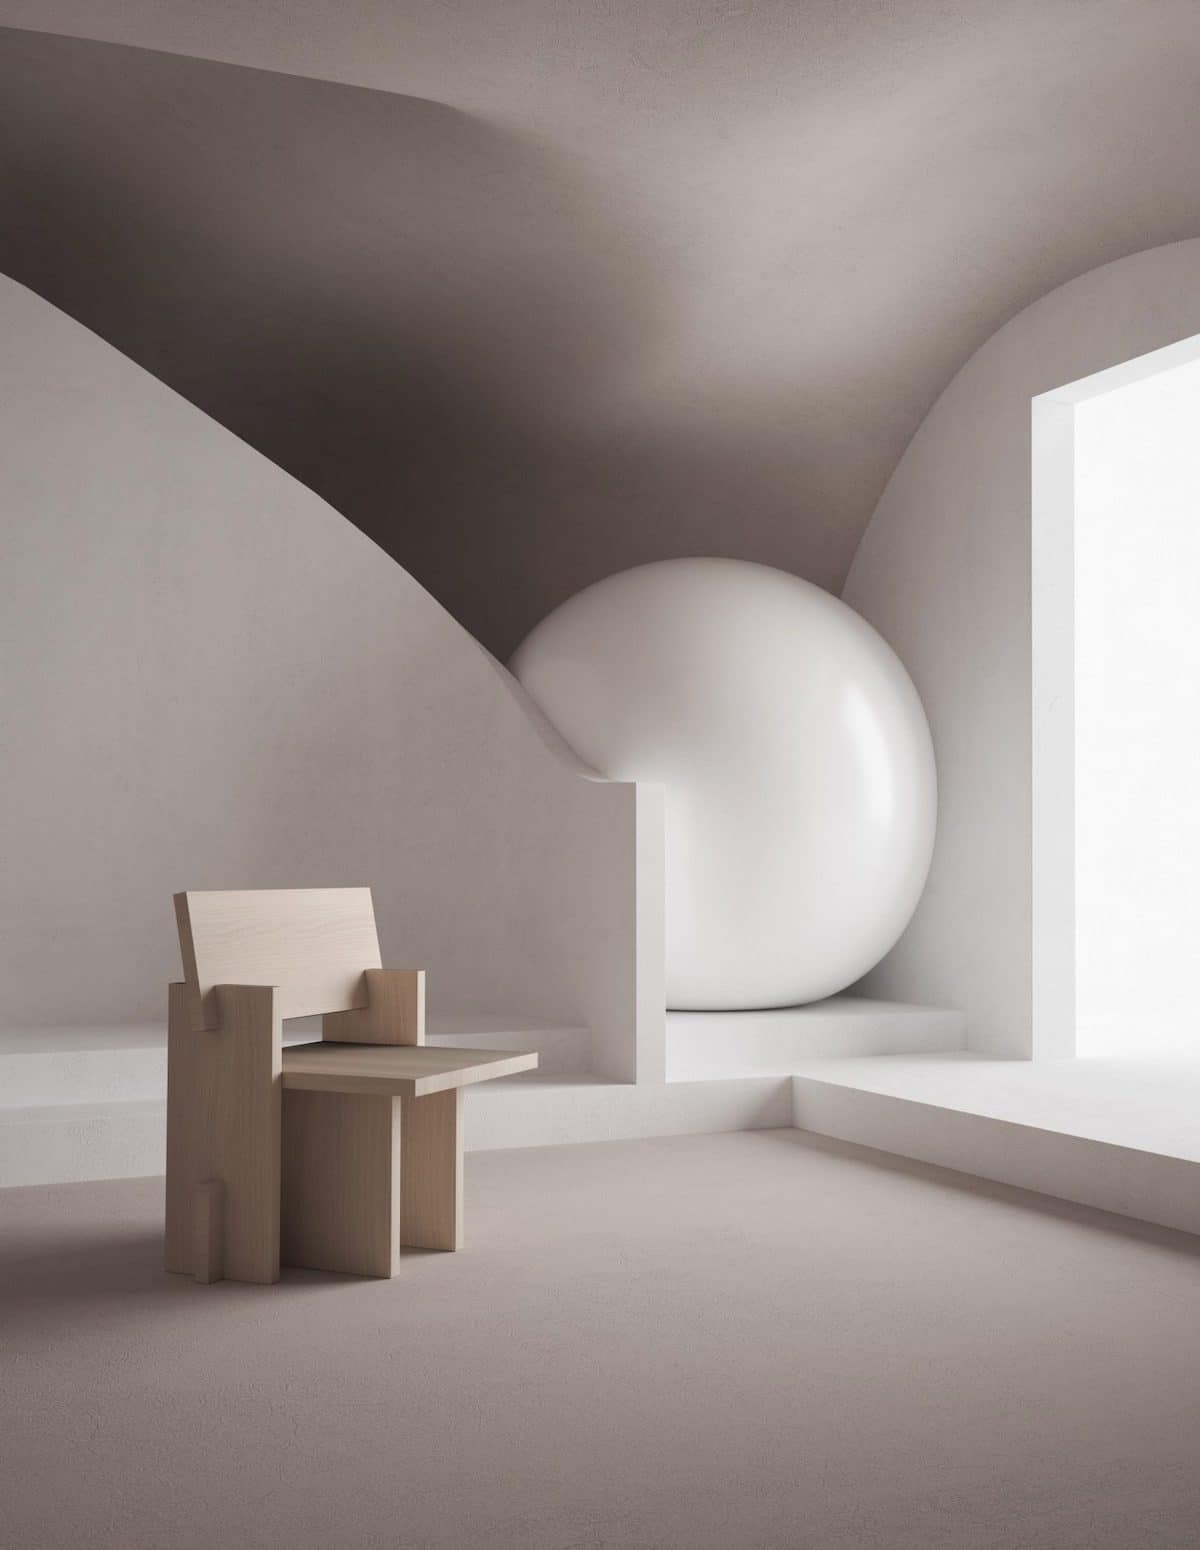 Chair and Ball in Interior Rendering by Sébastien Baert